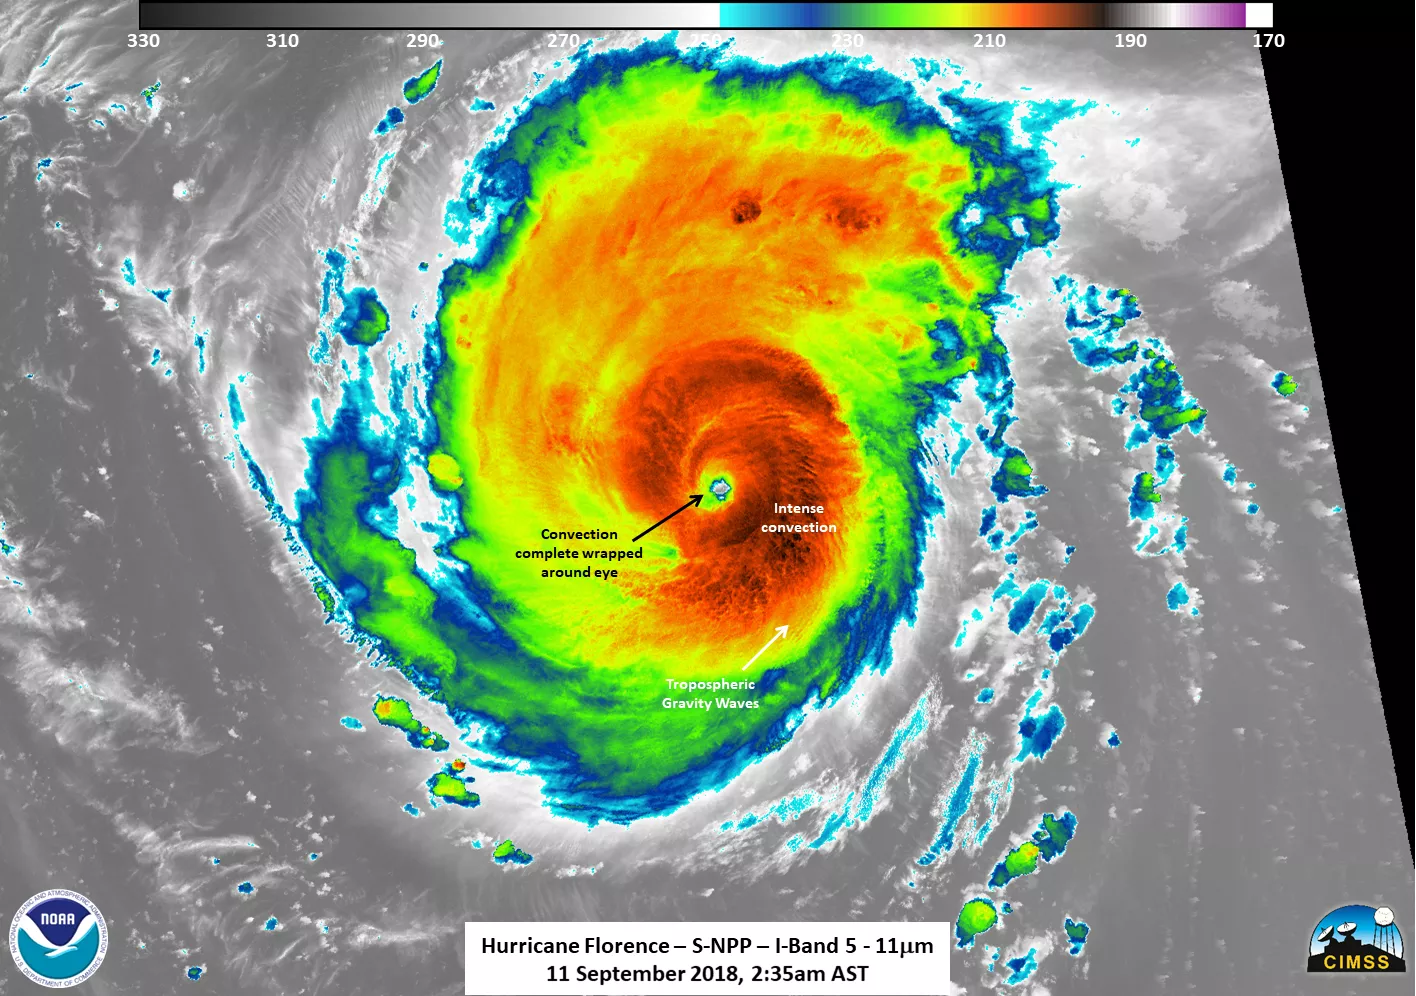 At 2:35 am EDT on Sept. 11, the Visible Infrared Imaging Radiometer Suite (VIIRS) instrument aboard NASA-NOAA’s Suomi NPP satellite captured this high-resolution image of Hurricane Florence in infrared. This was taken approximately at the same time as the previous AMSR-2 image. Image by NOAA/NASA/UWM-SSEC-CIMSS/William Straka III